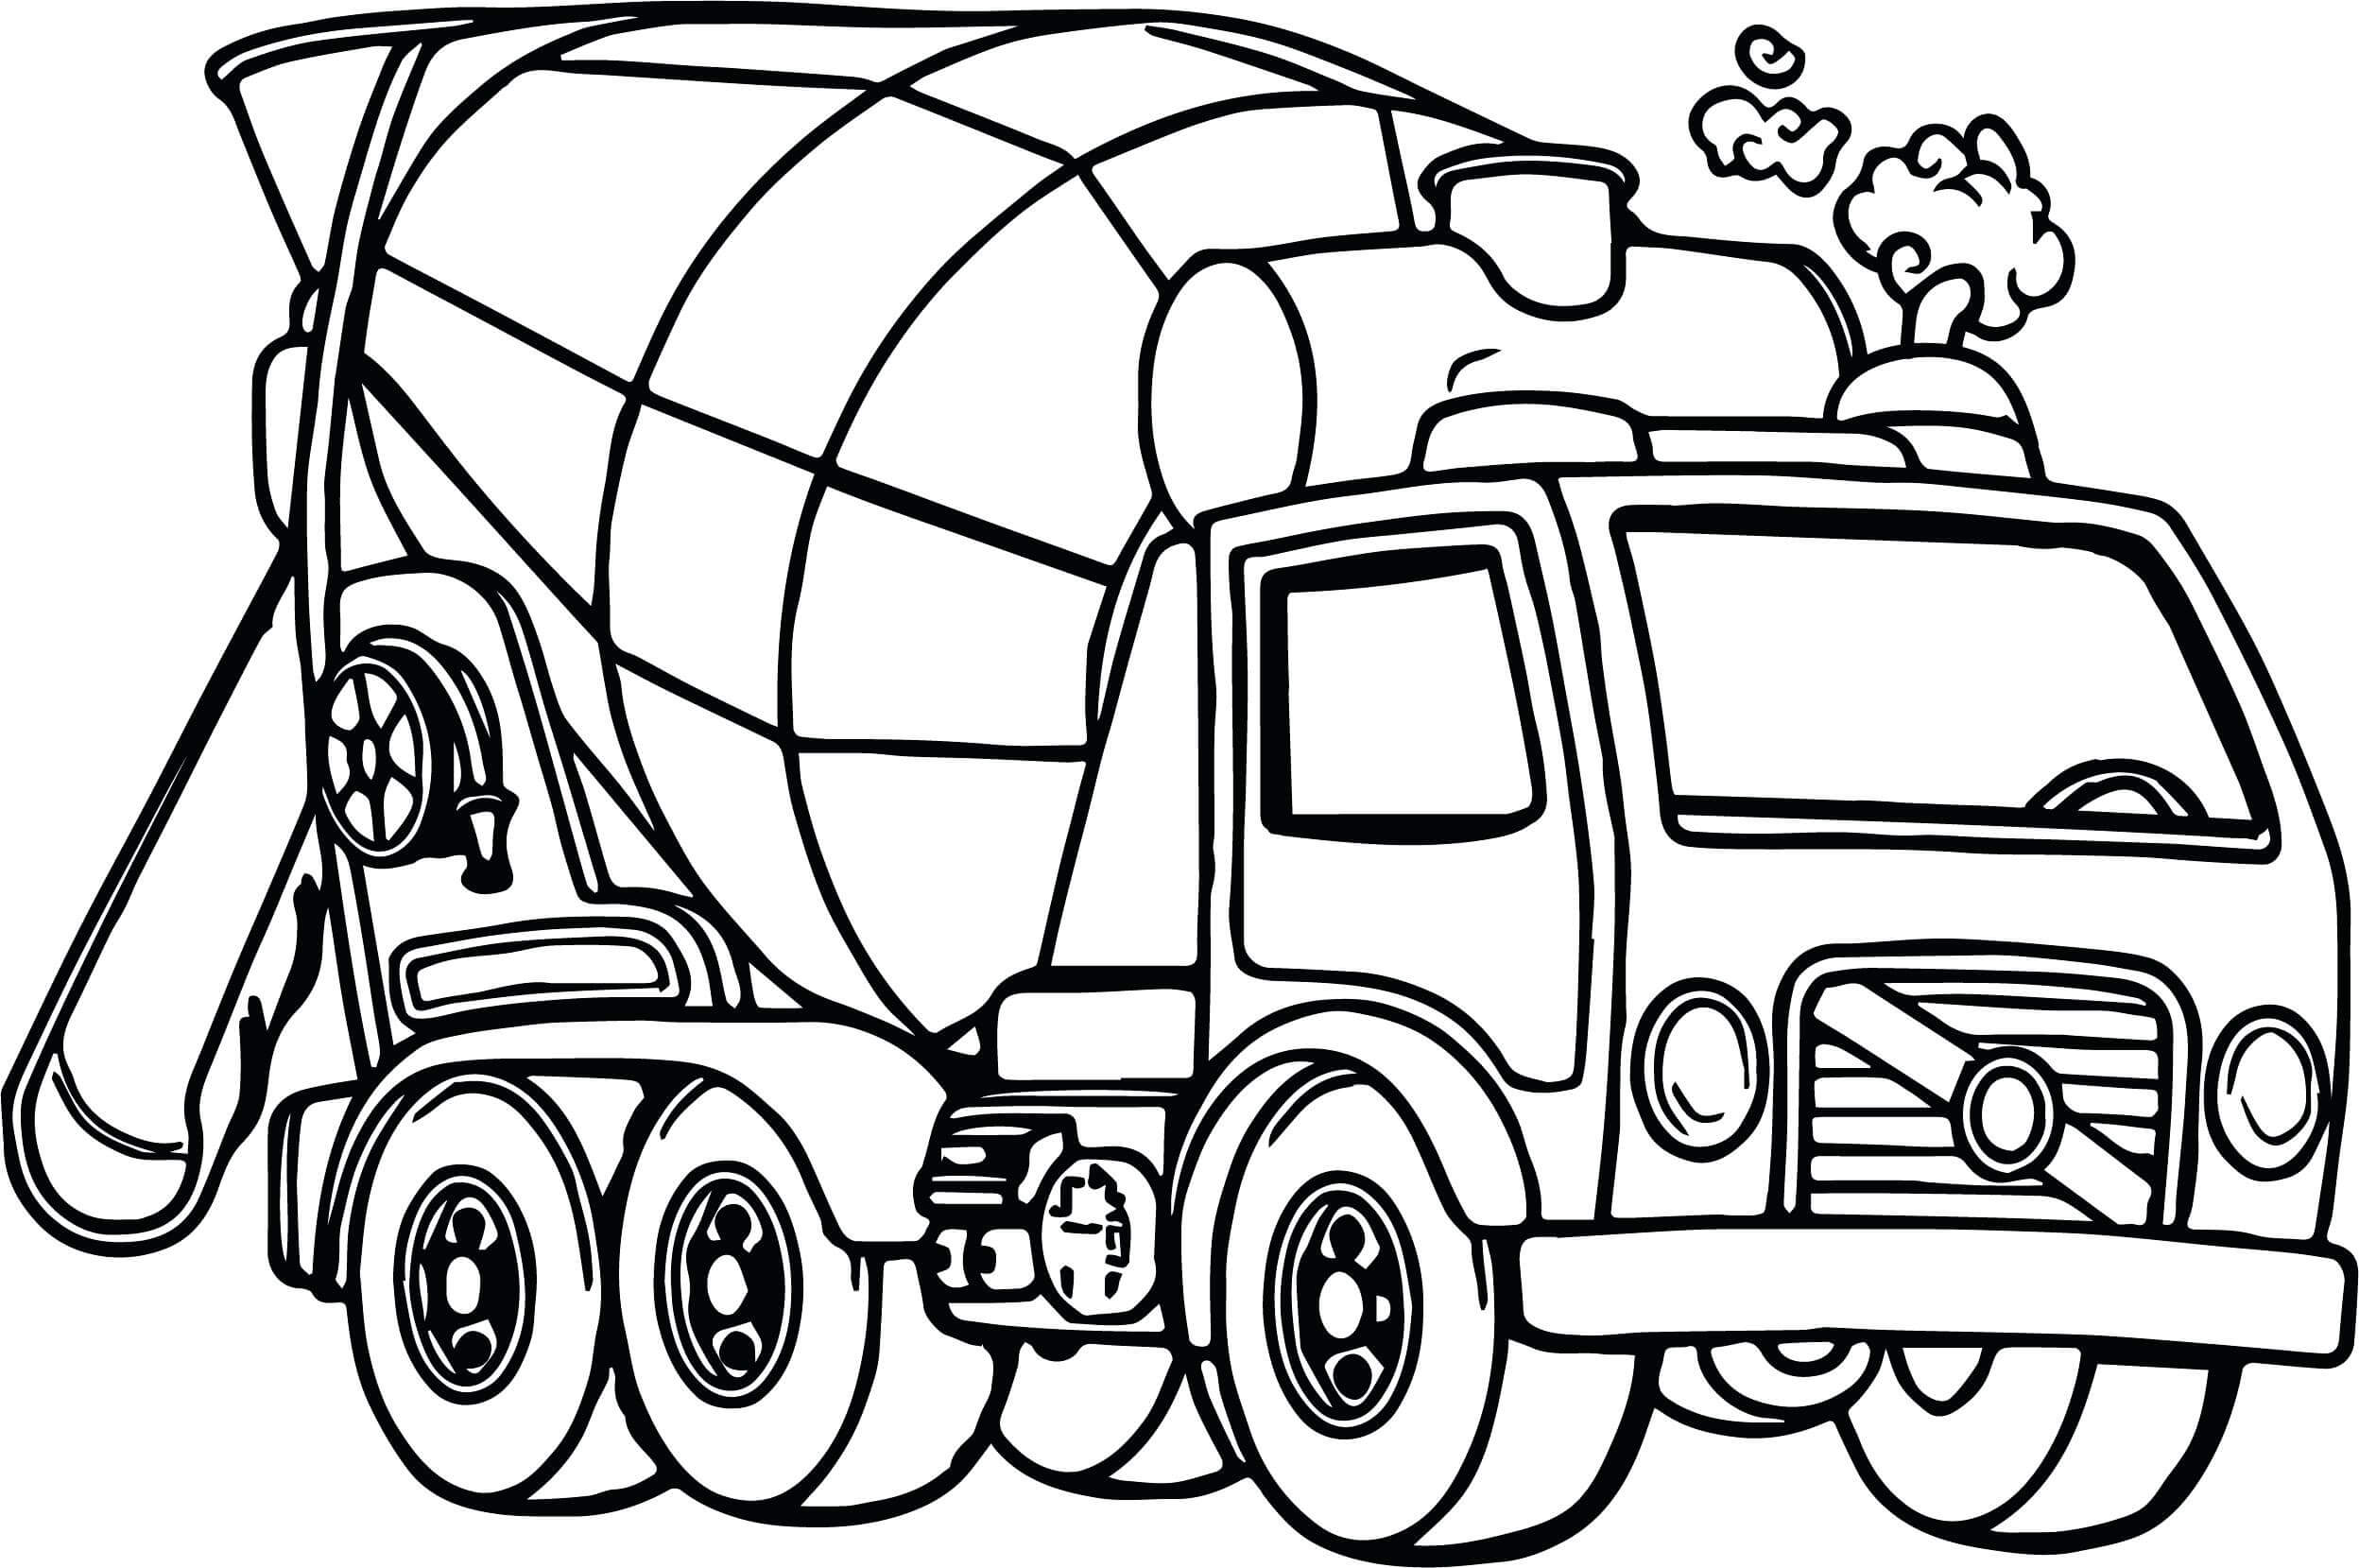 Coloriage Camion Malaxeur